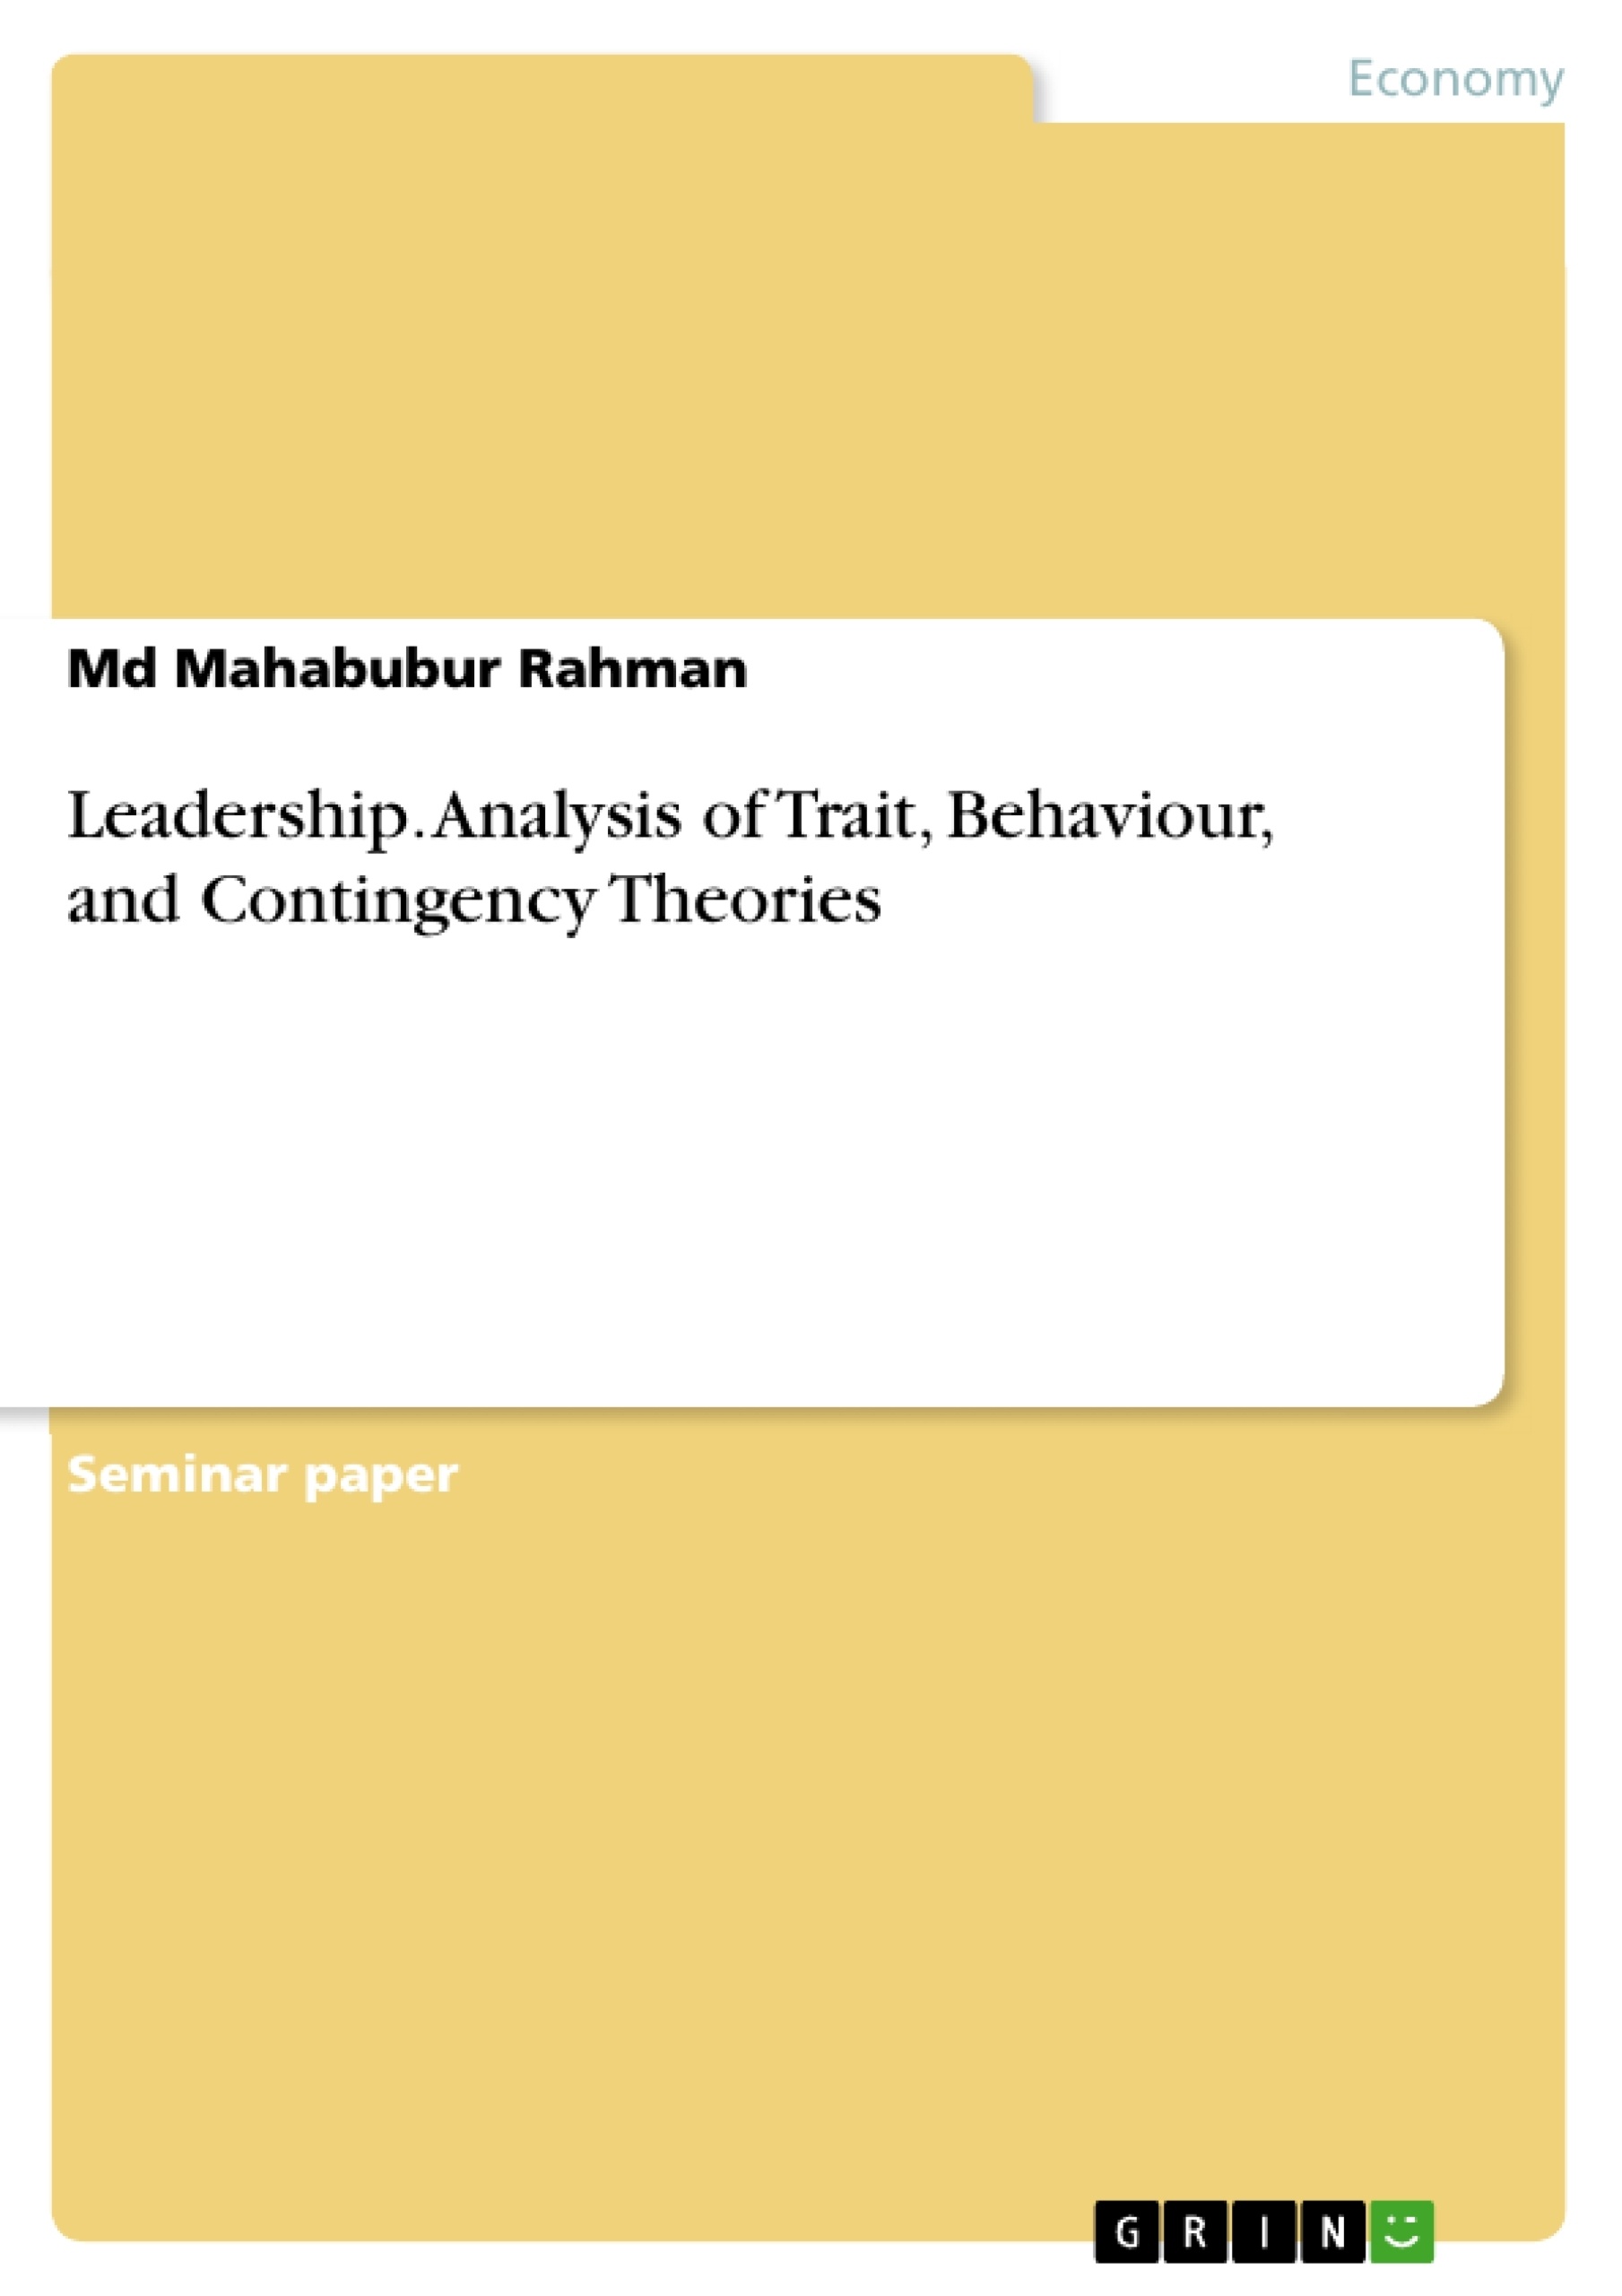 Title: Leadership. Analysis of Trait, Behaviour, and Contingency Theories